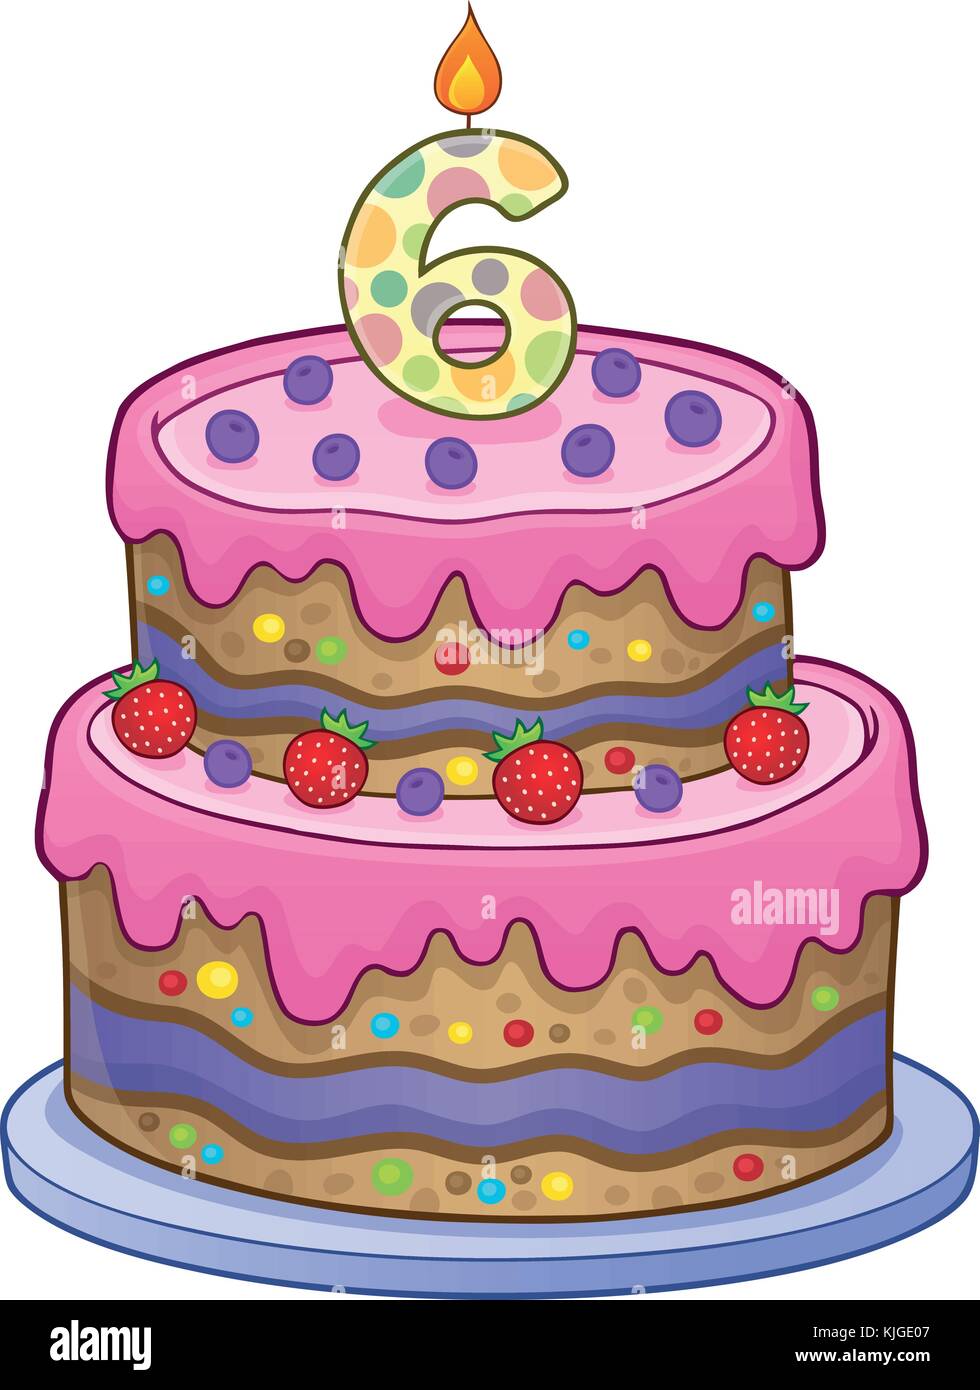 Birthday cake image for 6 years old - eps10 vector illustration. Stock Vector